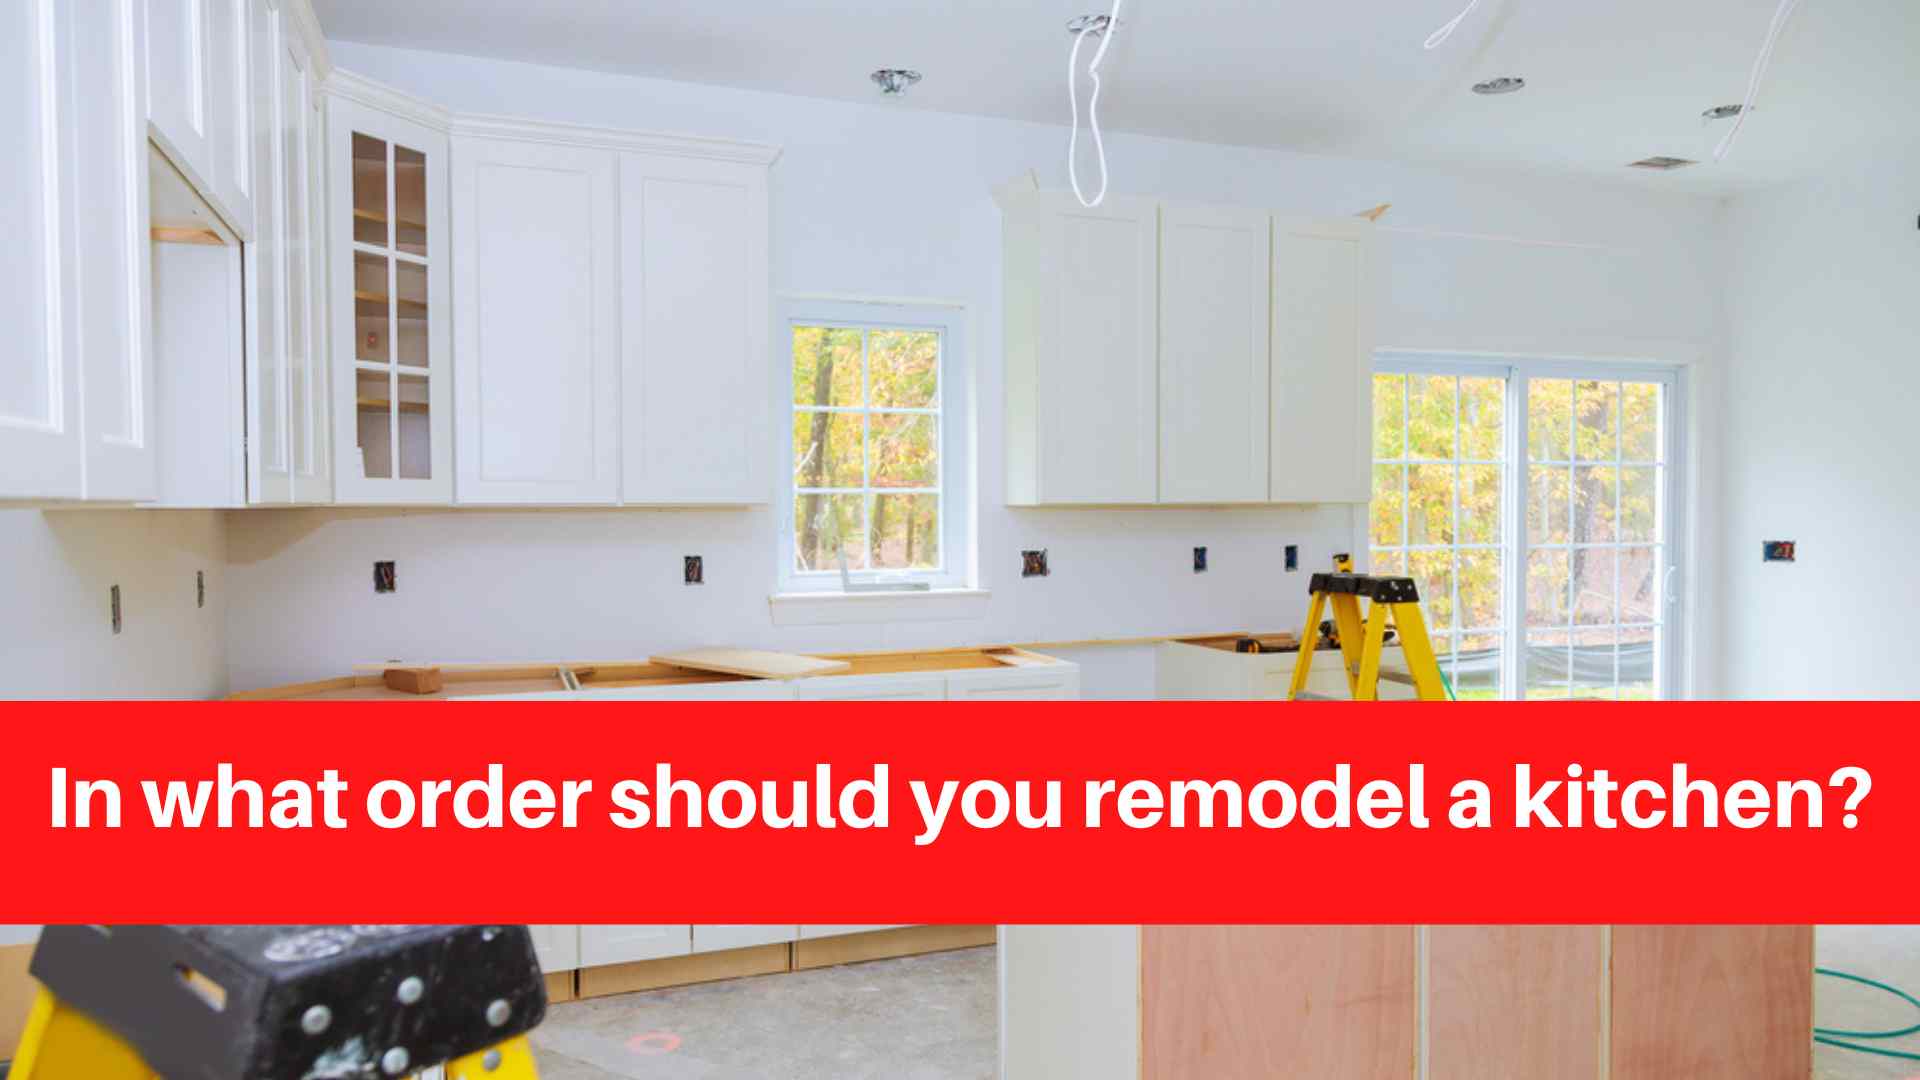 In what order should you remodel a kitchen